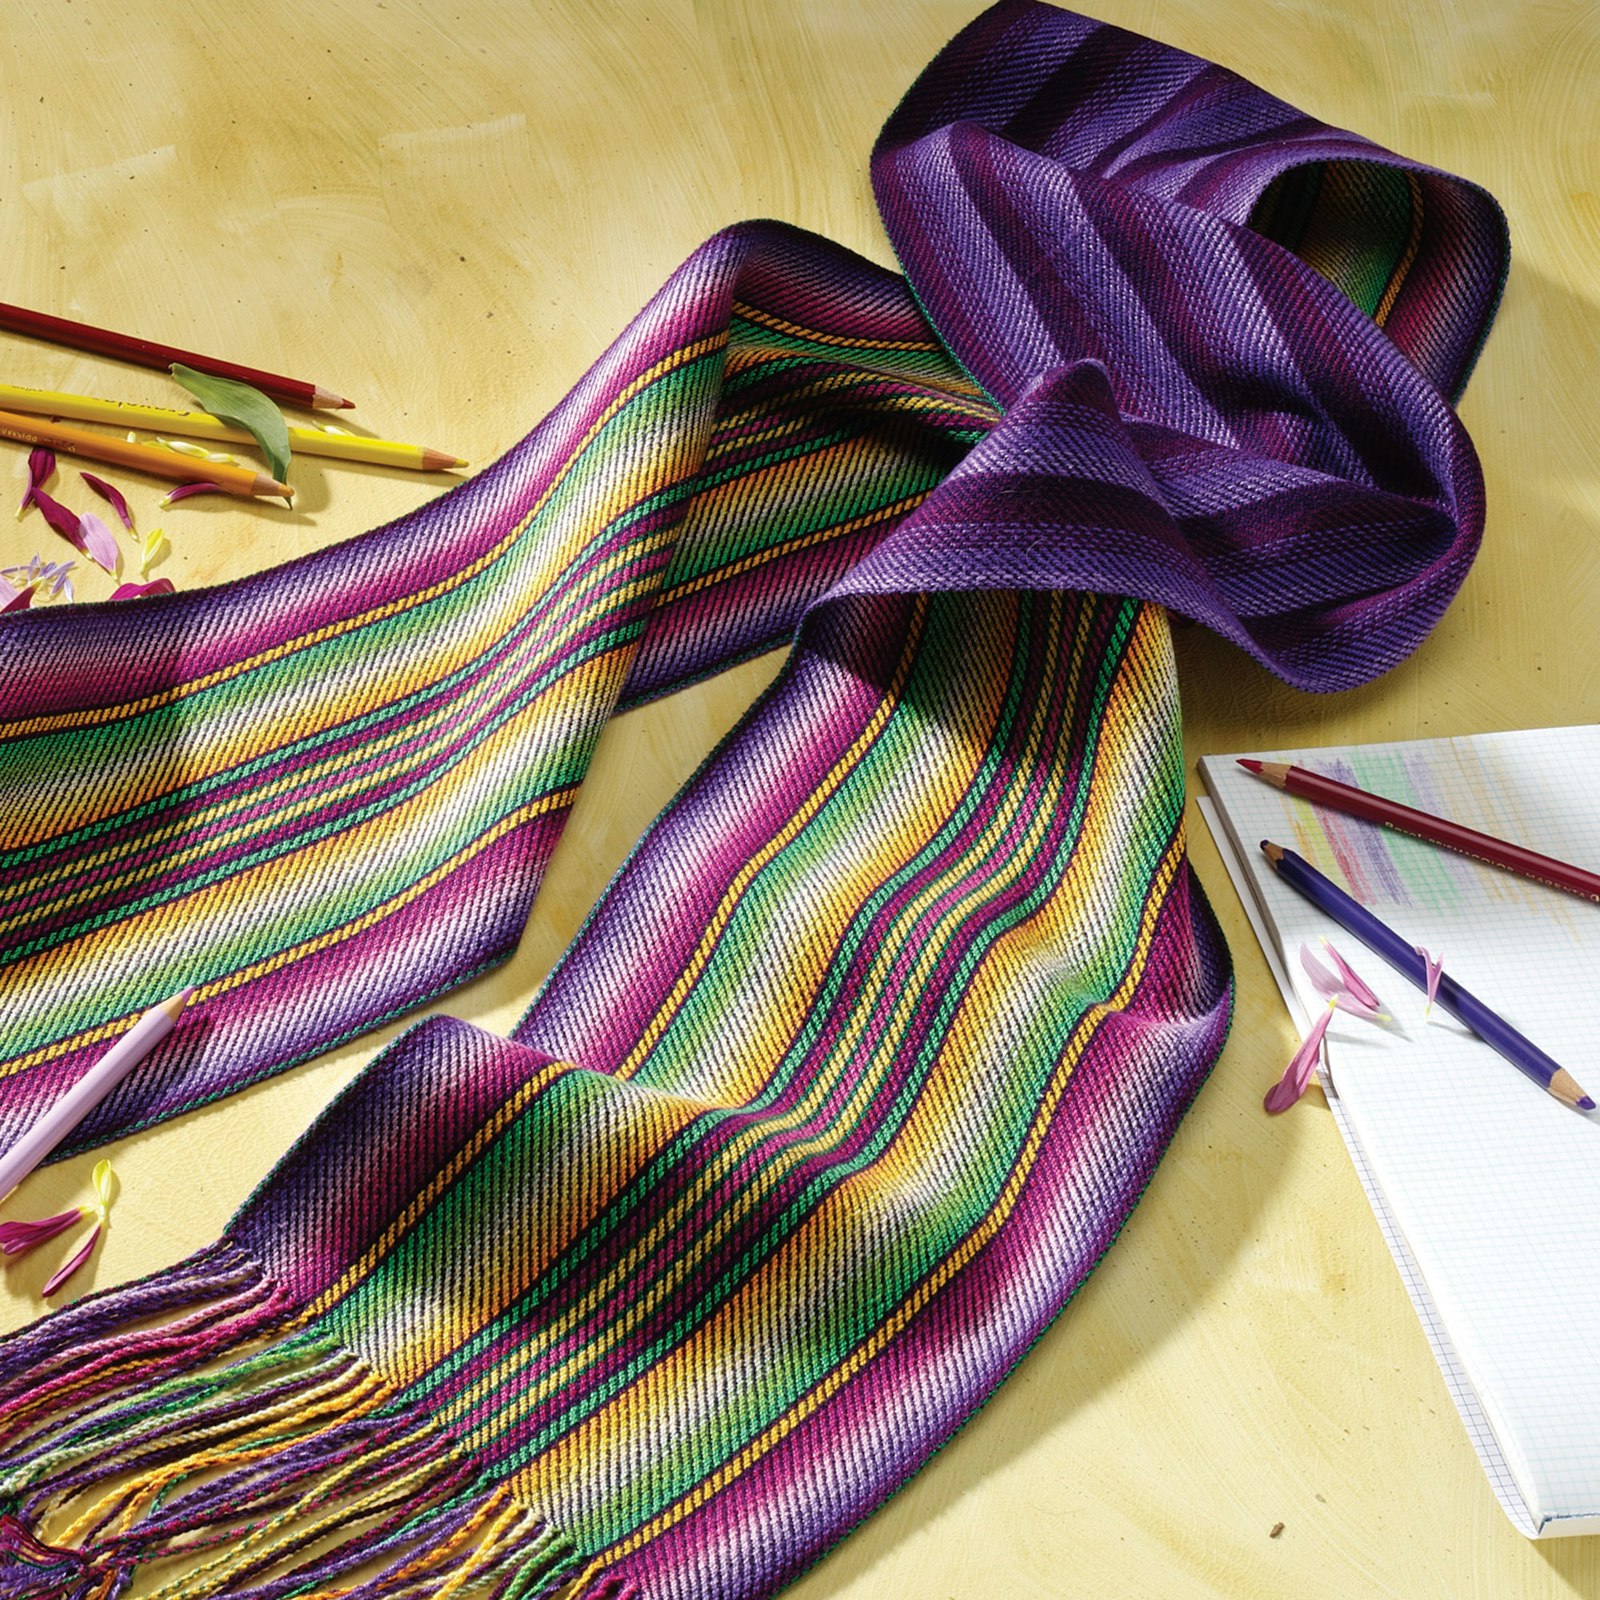 Cotton Twill Scarves from Our Archives!